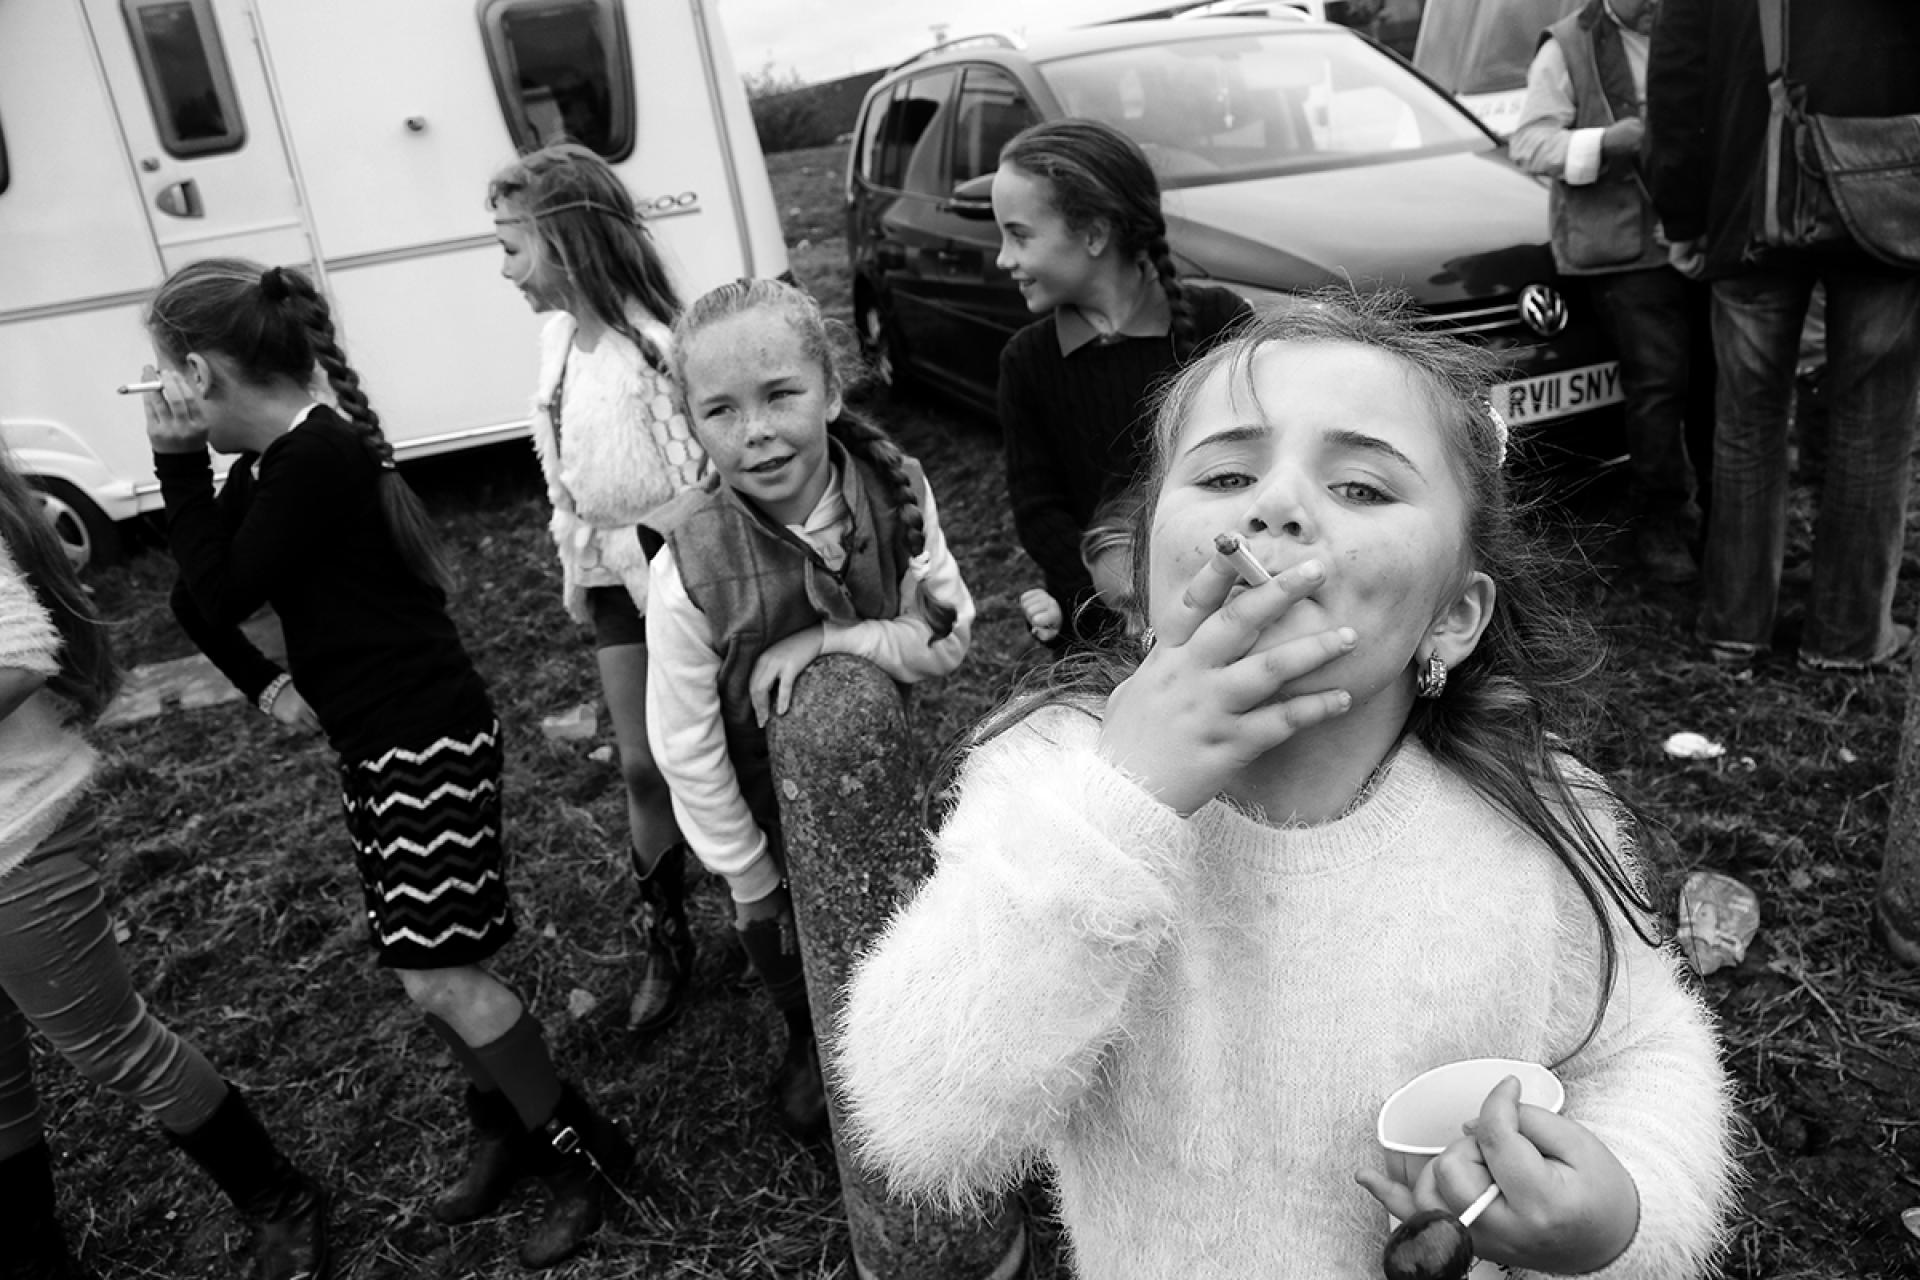 London Photography Awards Winner - Growing Up Travelling